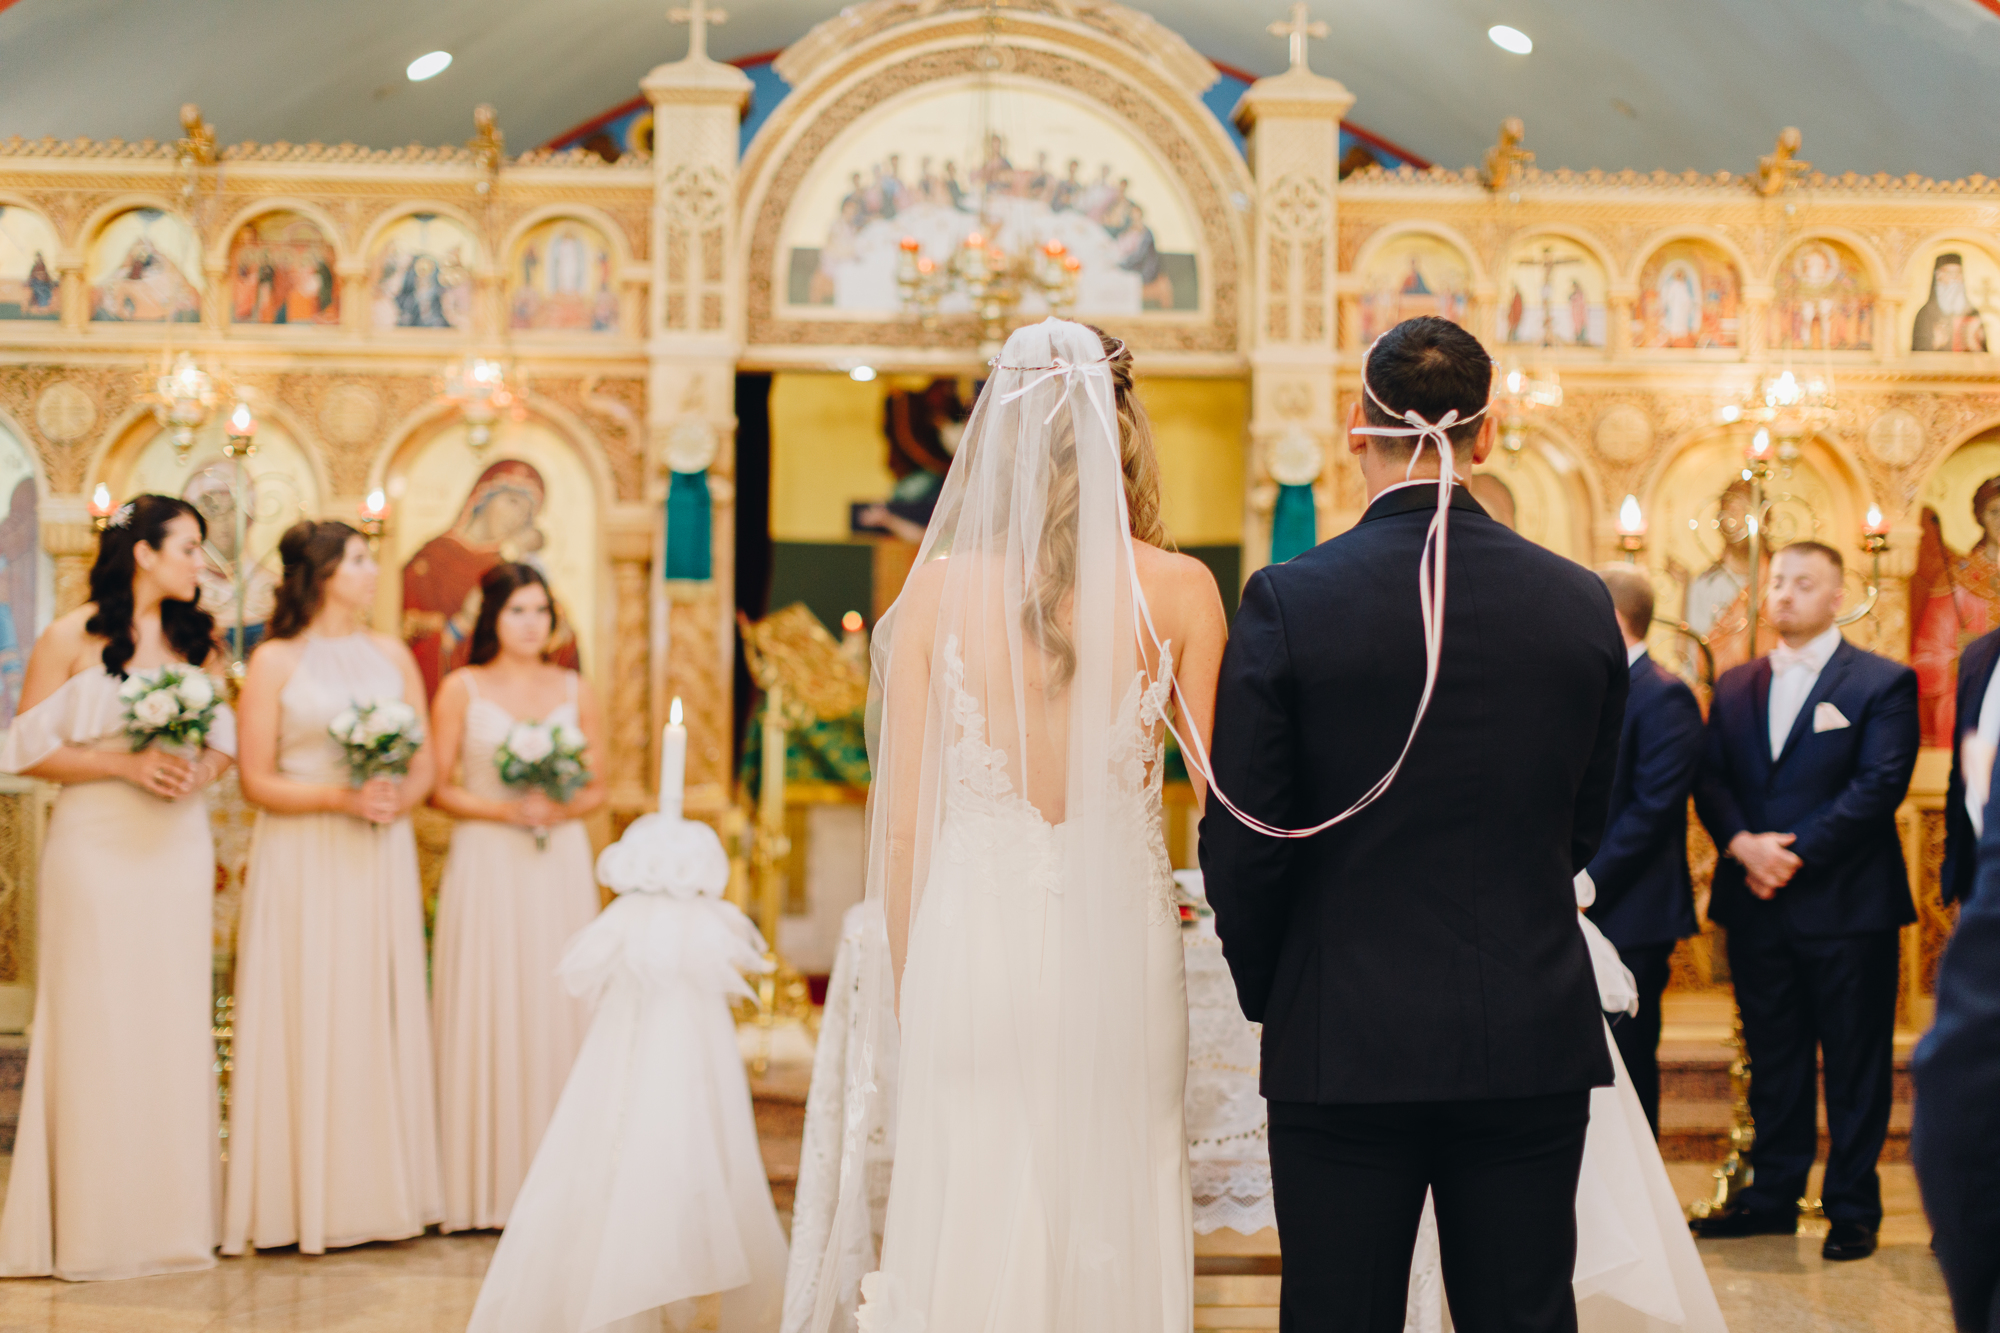 Wedding pictures from St. Markella Greek Orthodox Church in Wantagh, NY